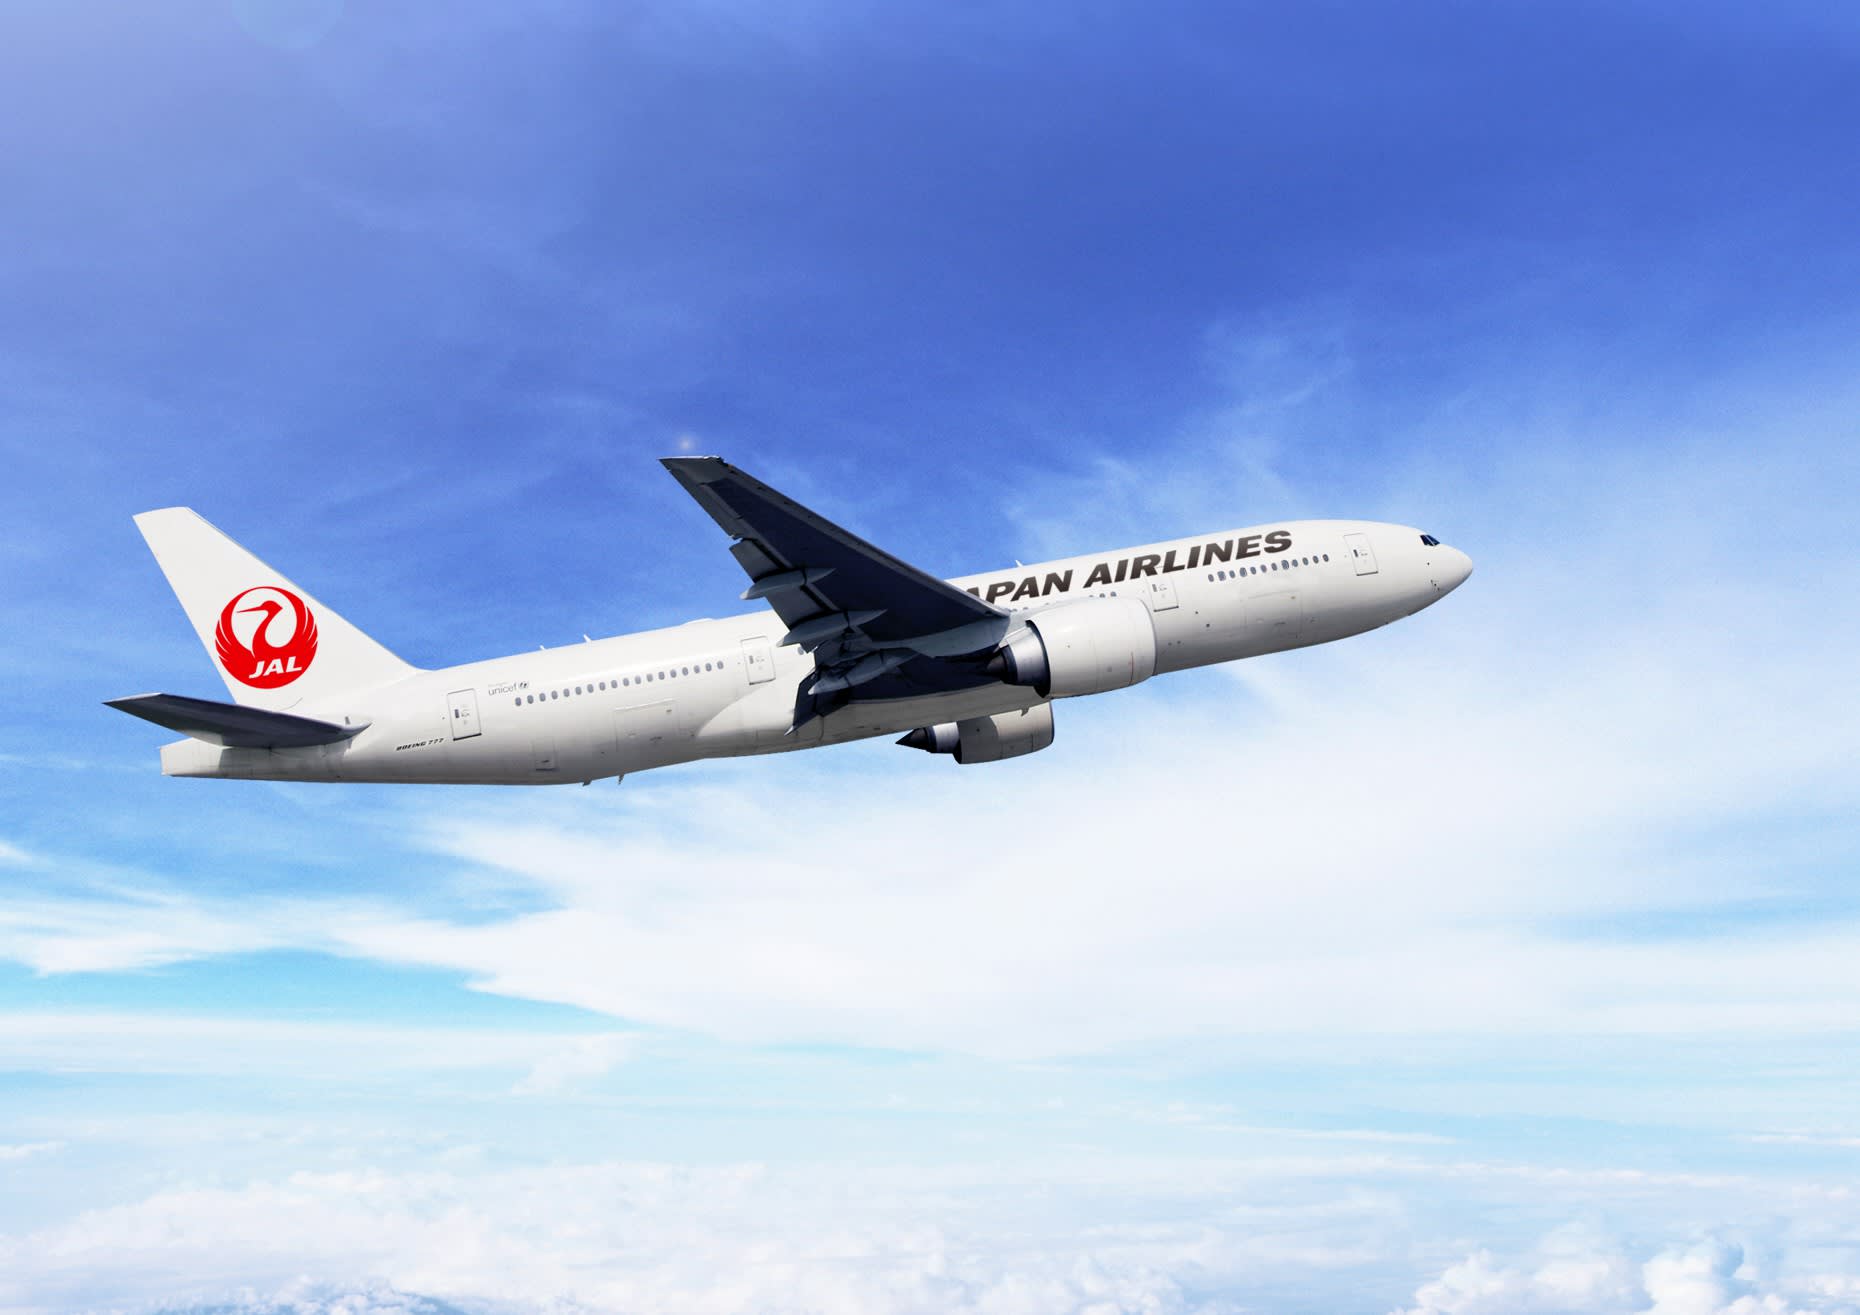 Old Jal Logo - JAL aims to give old clothes new life as jet fuel Asian Review